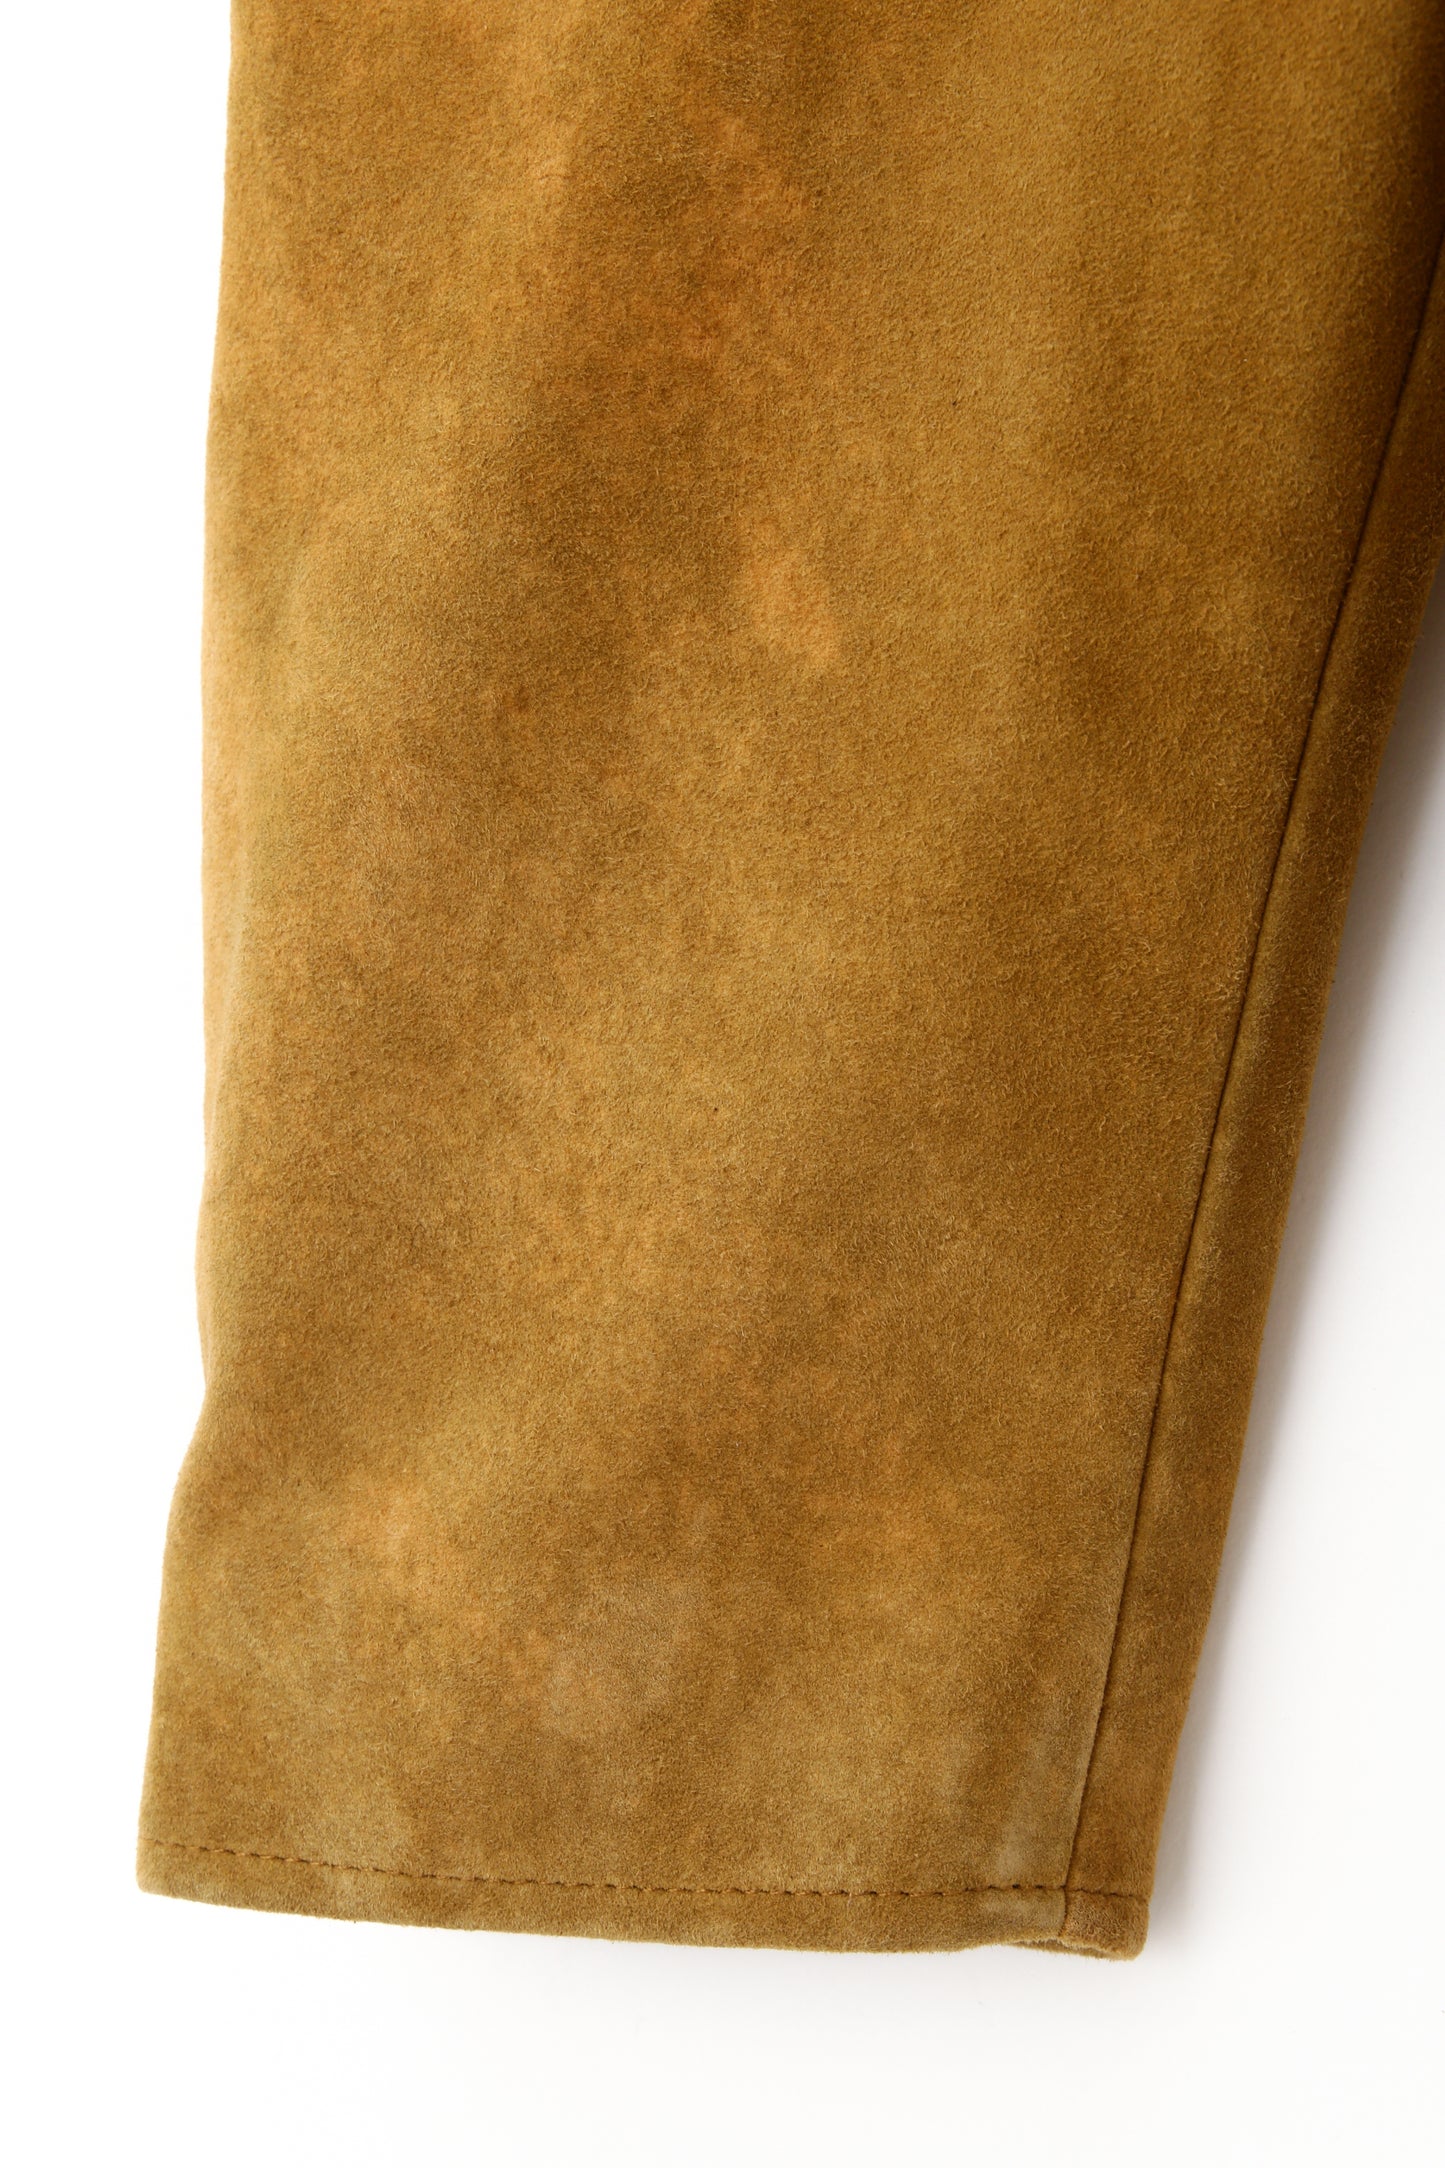 SUEDE LEATHER RIDER'S JACKET -Sheep suede cashmere finish-